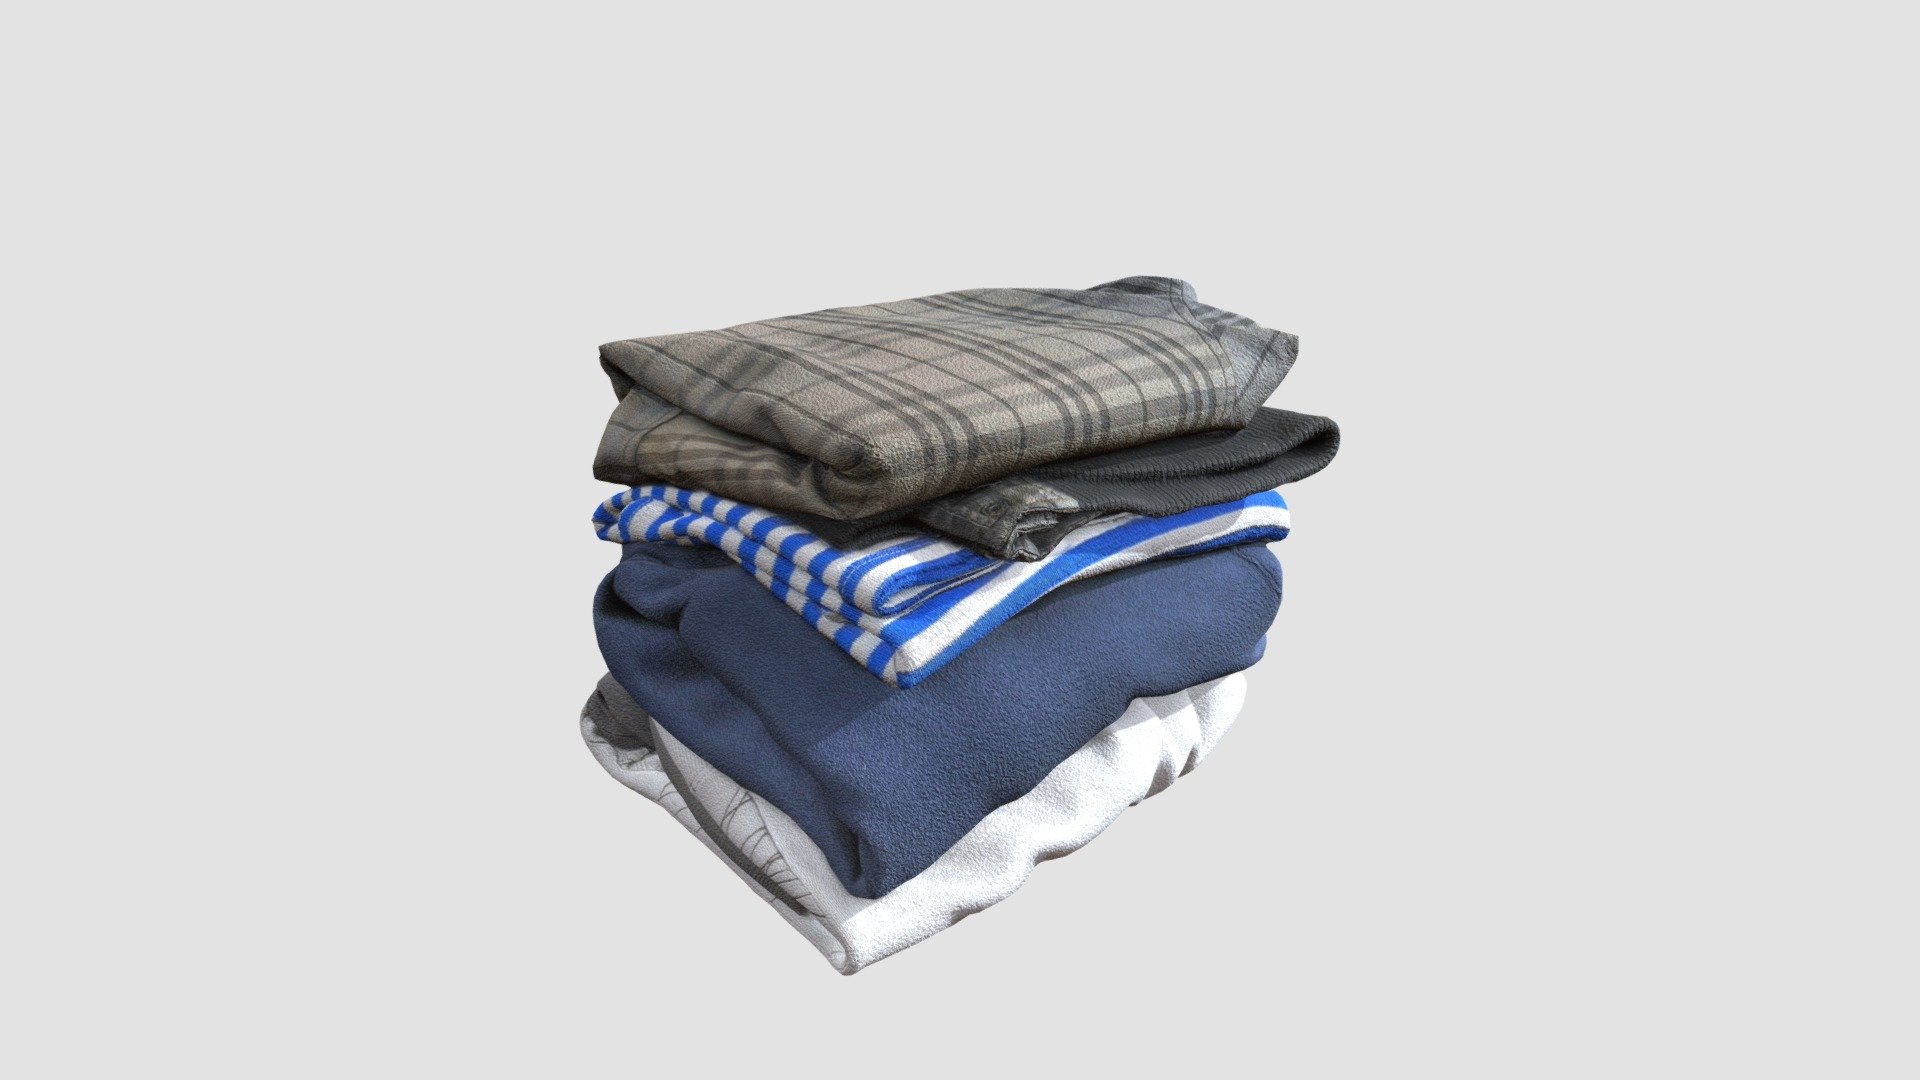 Highly detailed 3d model of clothes with all textures, shaders and materials. It is ready to use, just put it into your scene 3d model